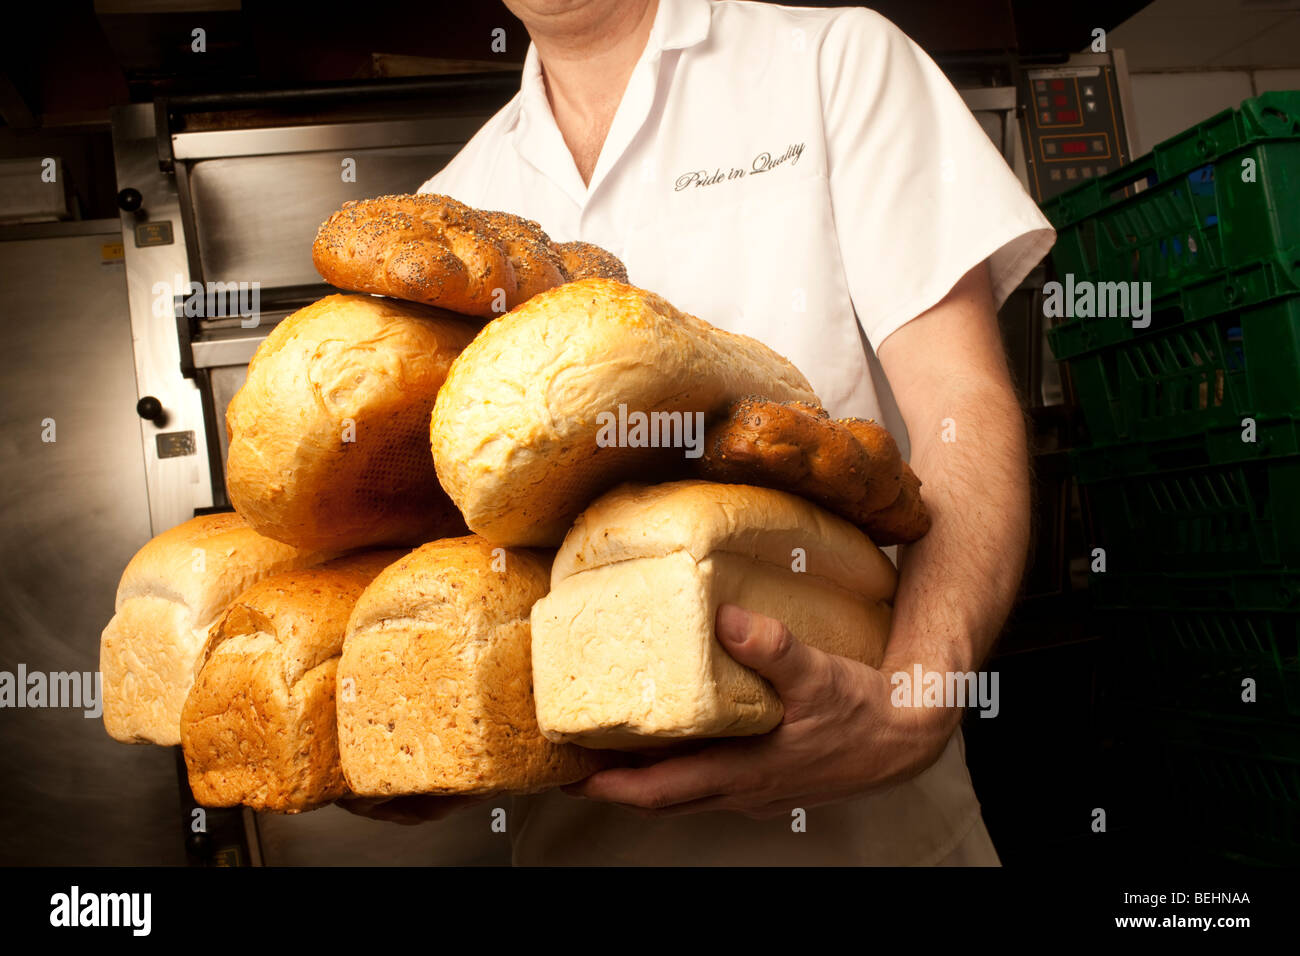 Baker holding pagnotte di pane Foto Stock